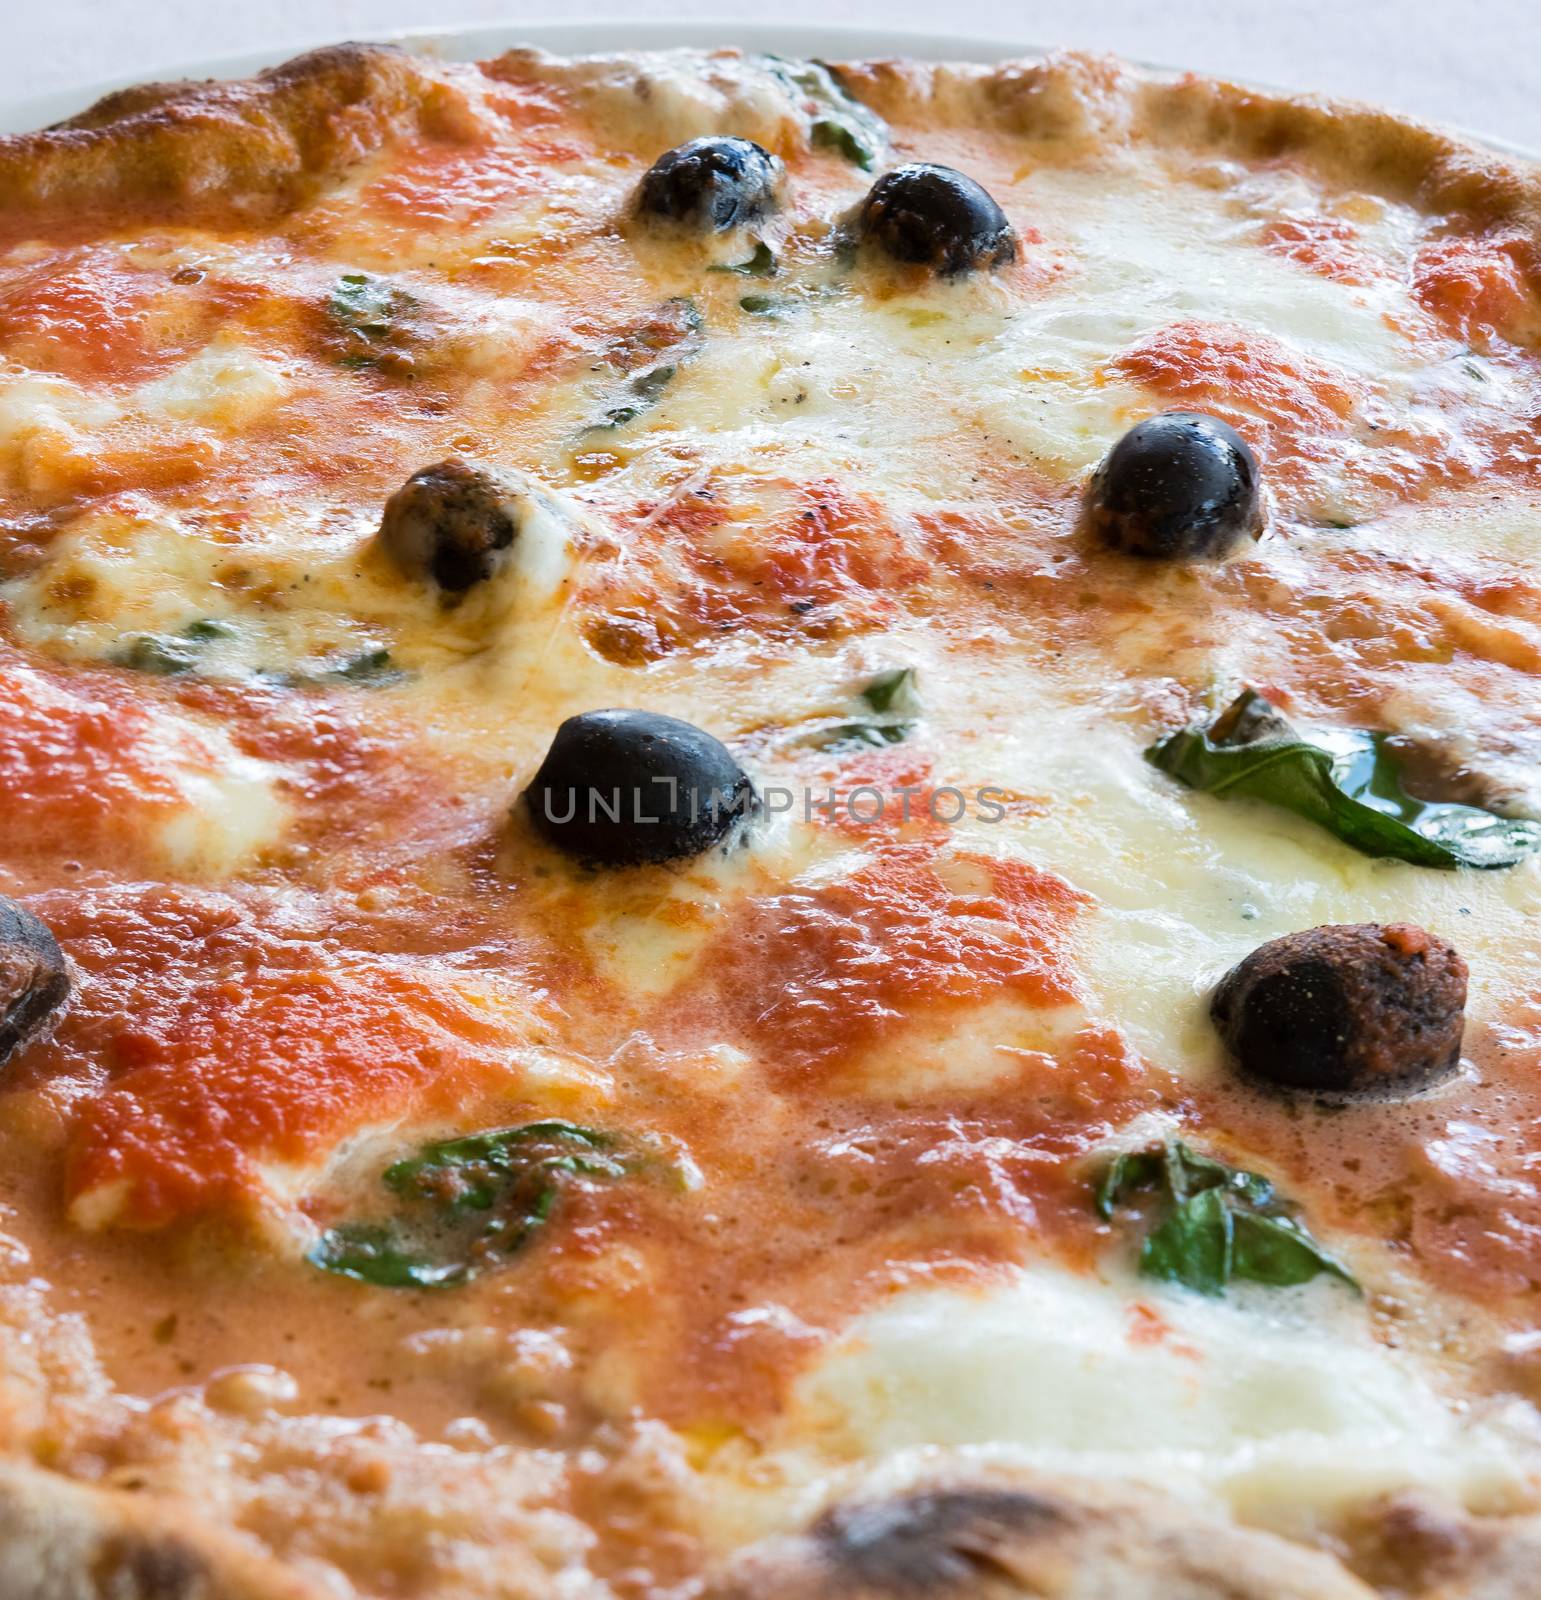 Pizza with olives,tomato and cheese by Robertobinetti70